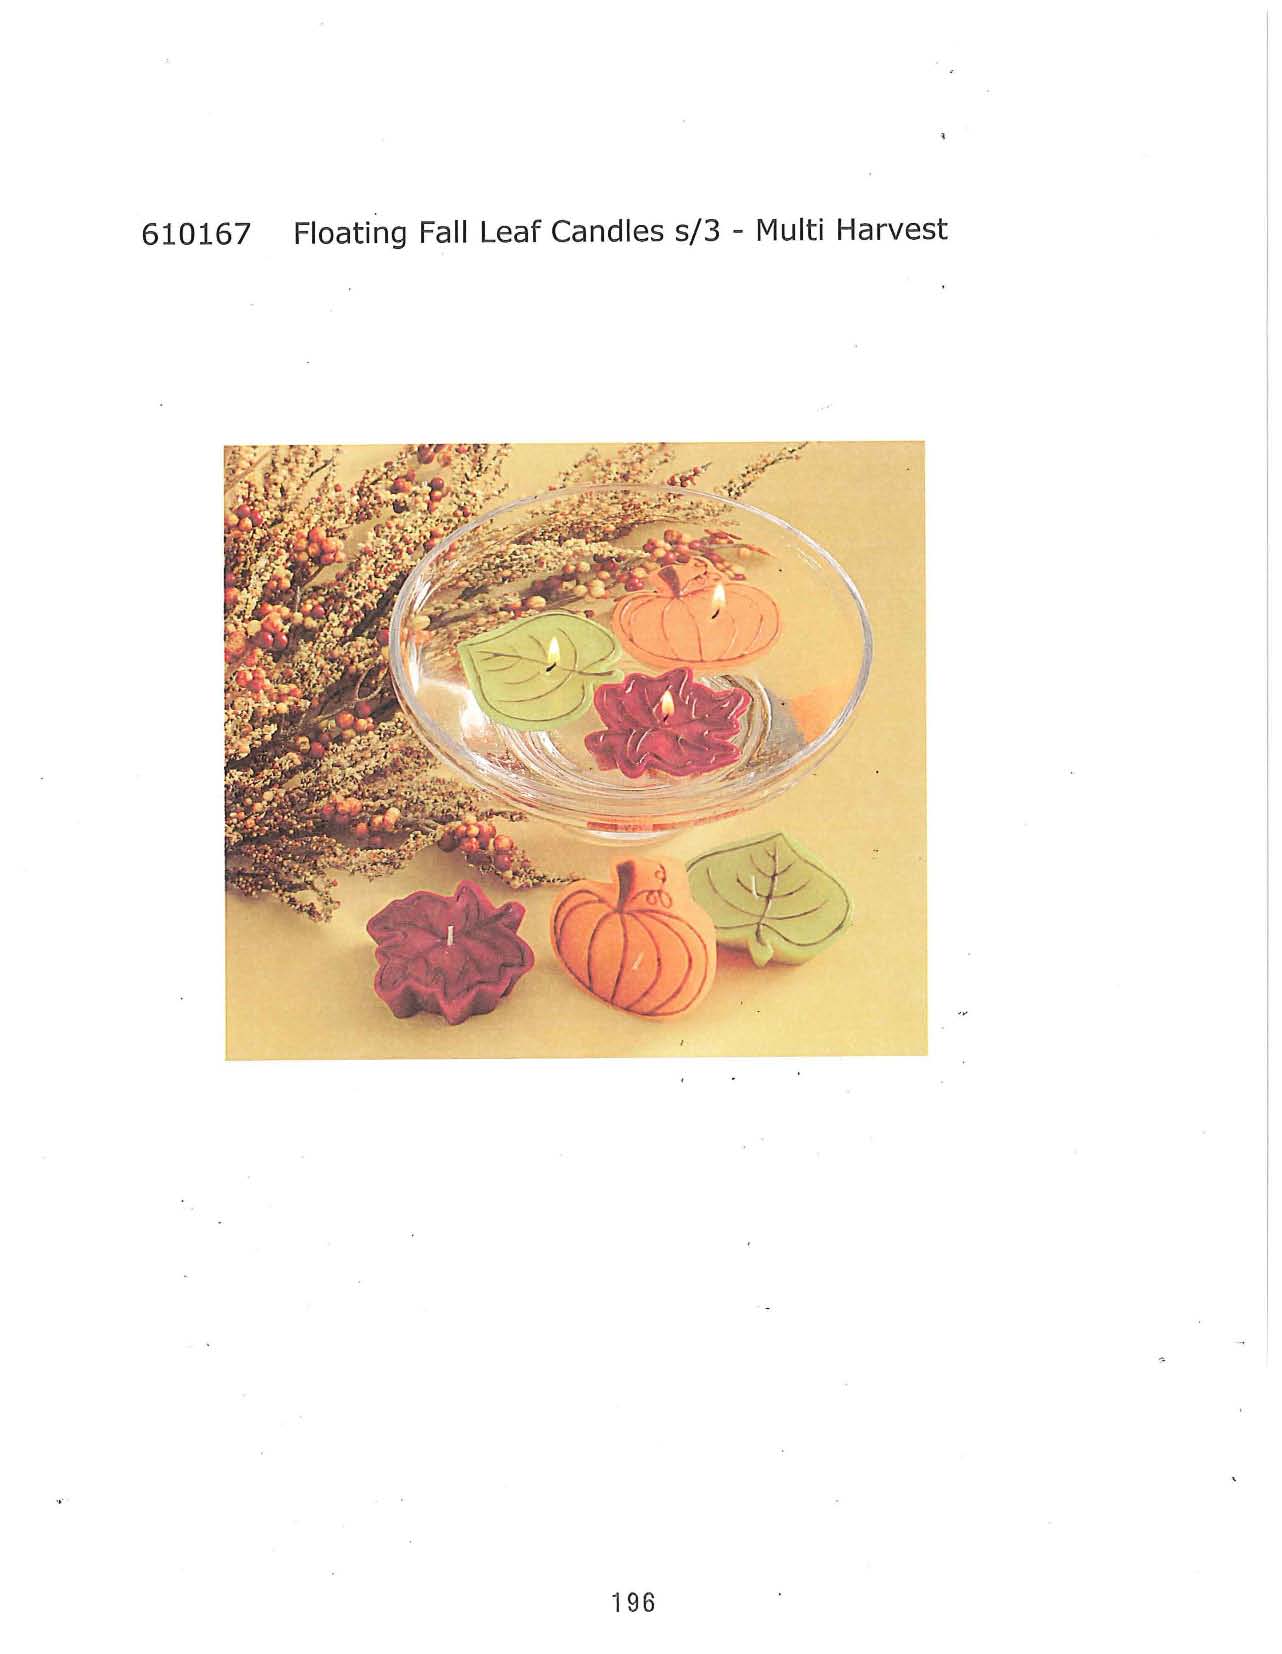 Floating Fall Leaft Candle s/3 - Multi Harvest